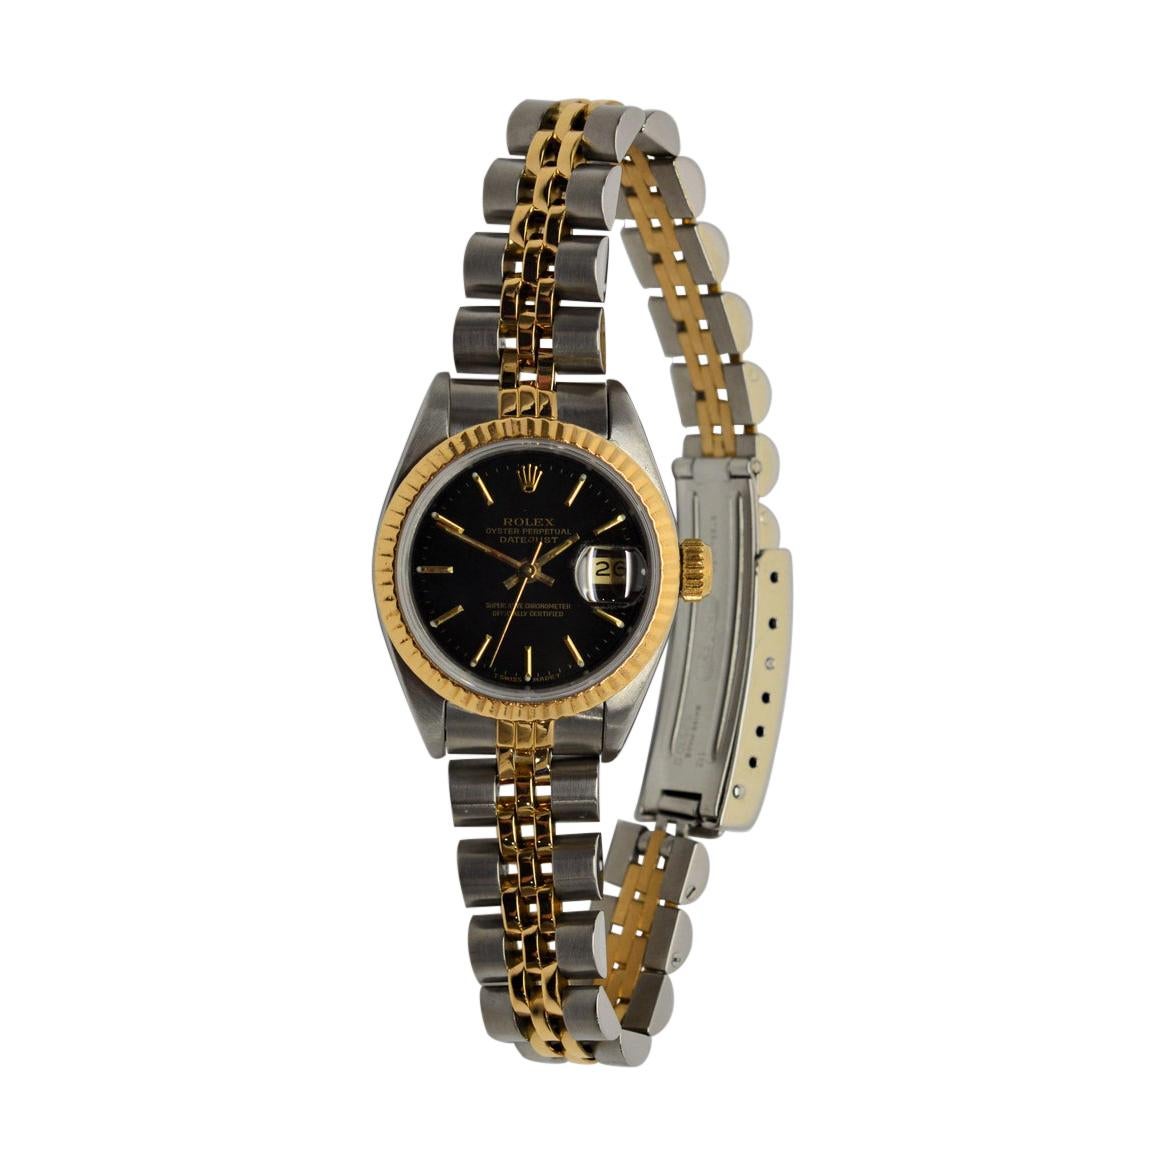 Gold and Stainless Steel Rolex Watch Model 69173